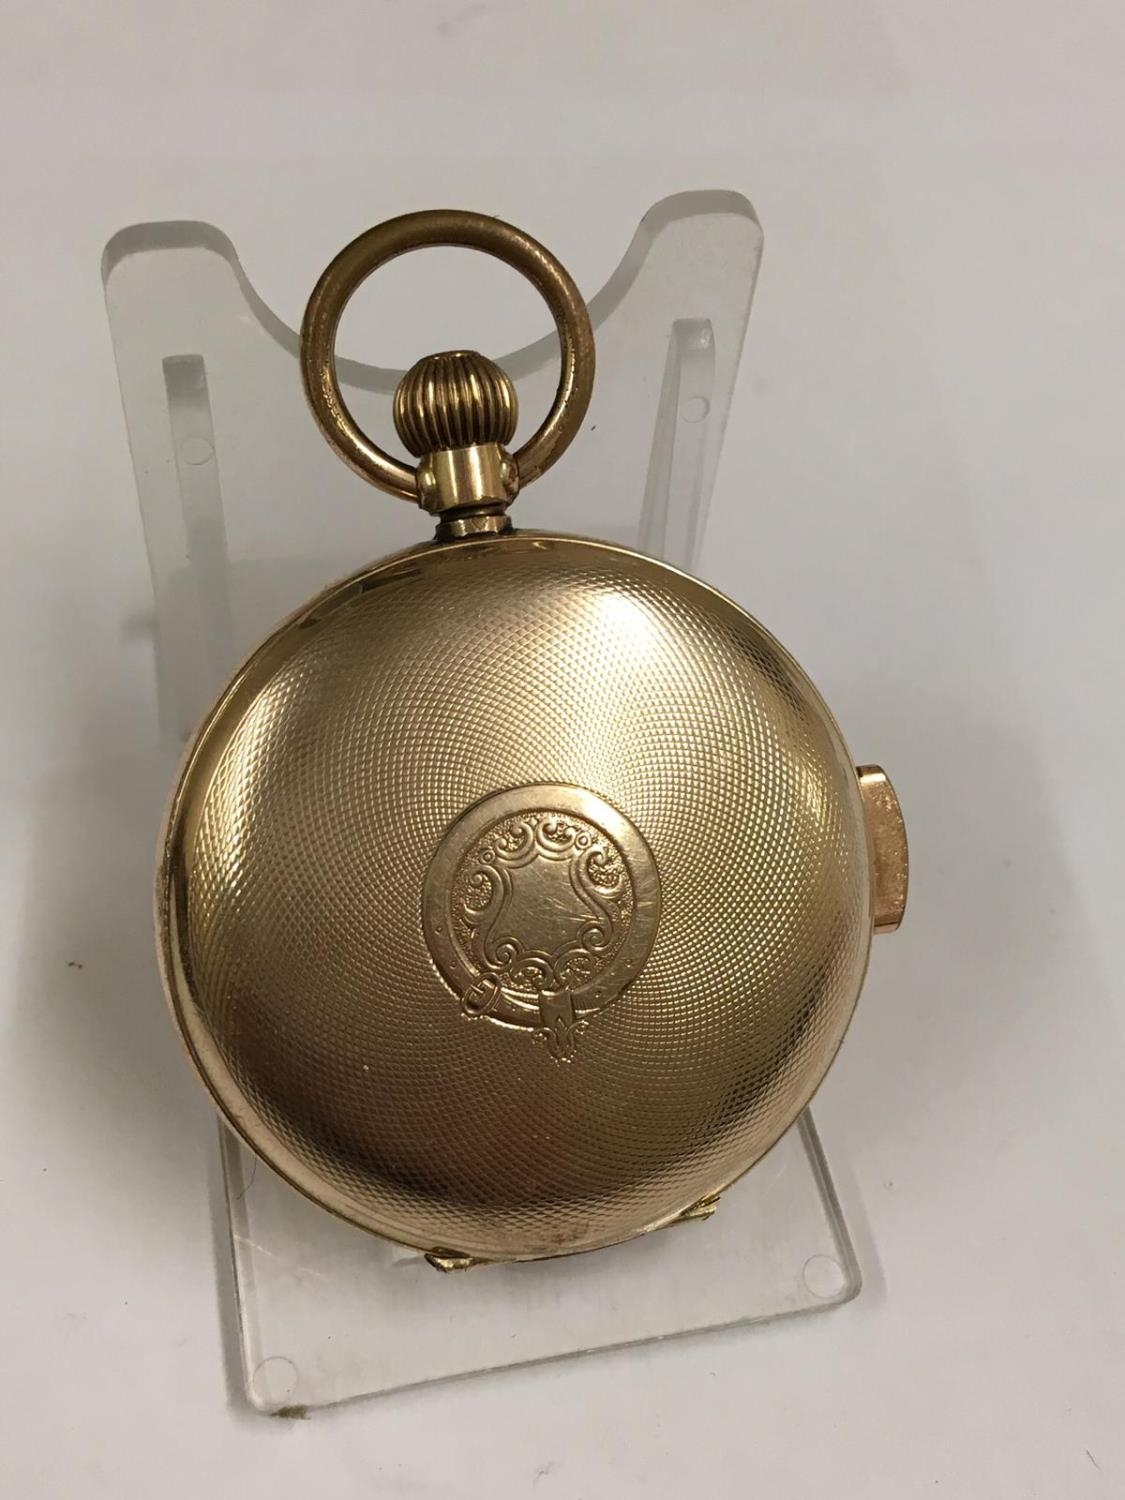 Vintage gold filled ottoman quarter repeater pocket watch ticking and repeat function working . Sold - Image 4 of 7